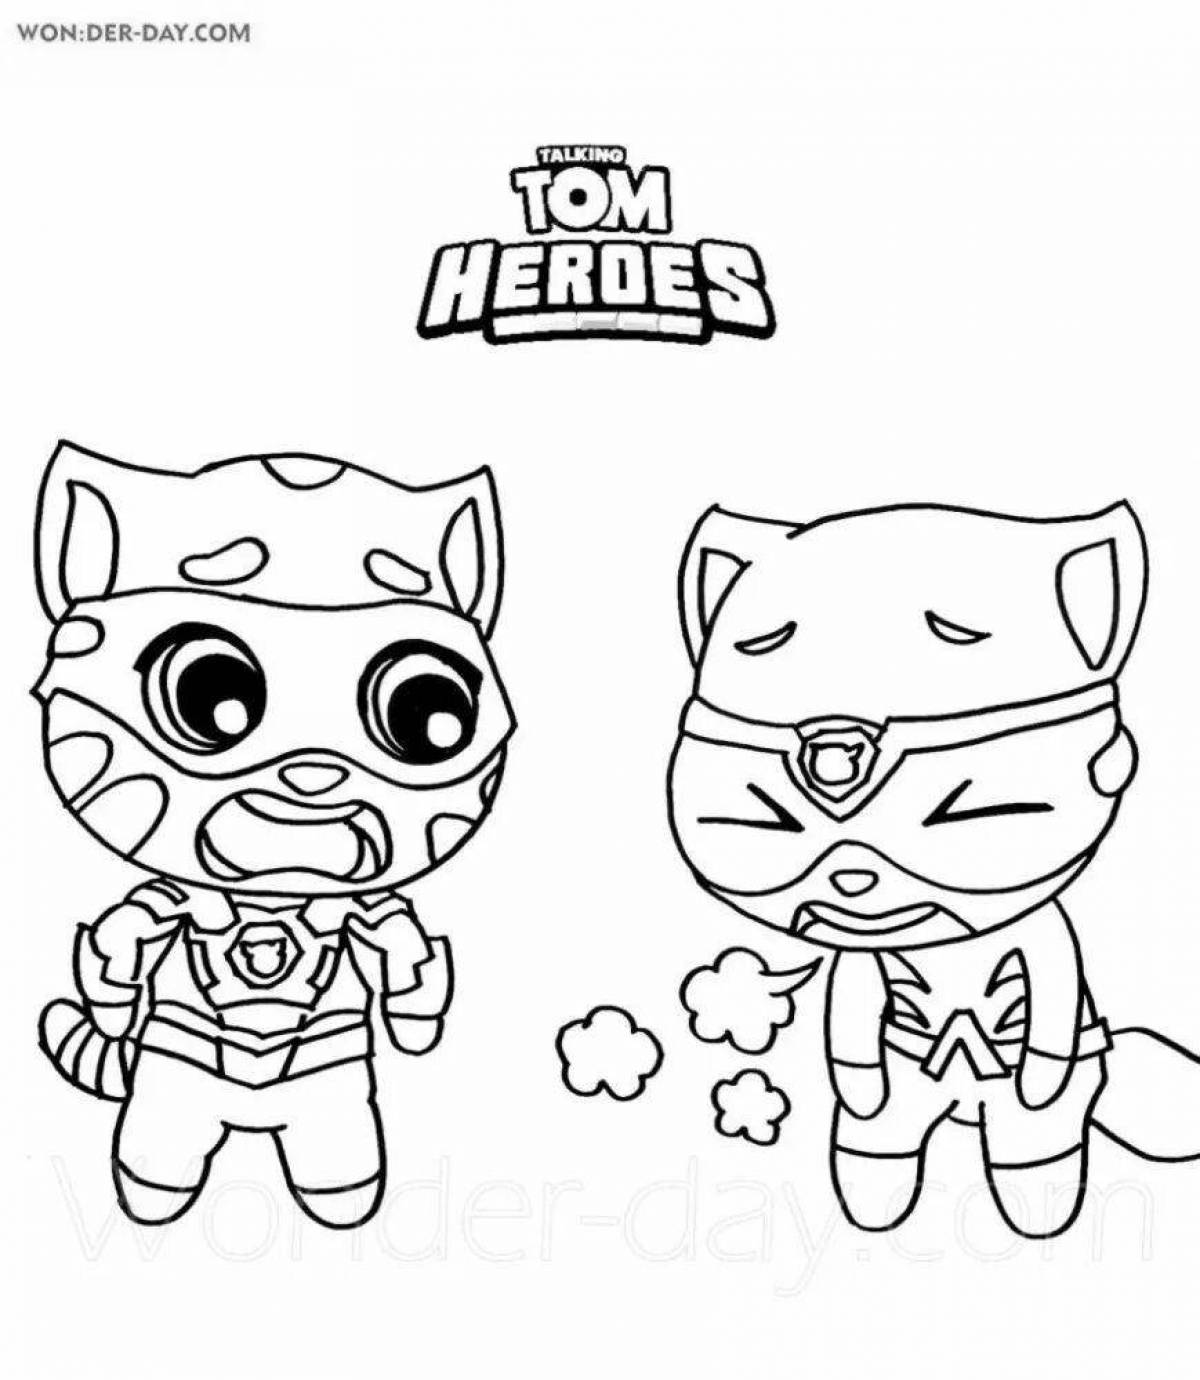 Coloring book charming cat tom